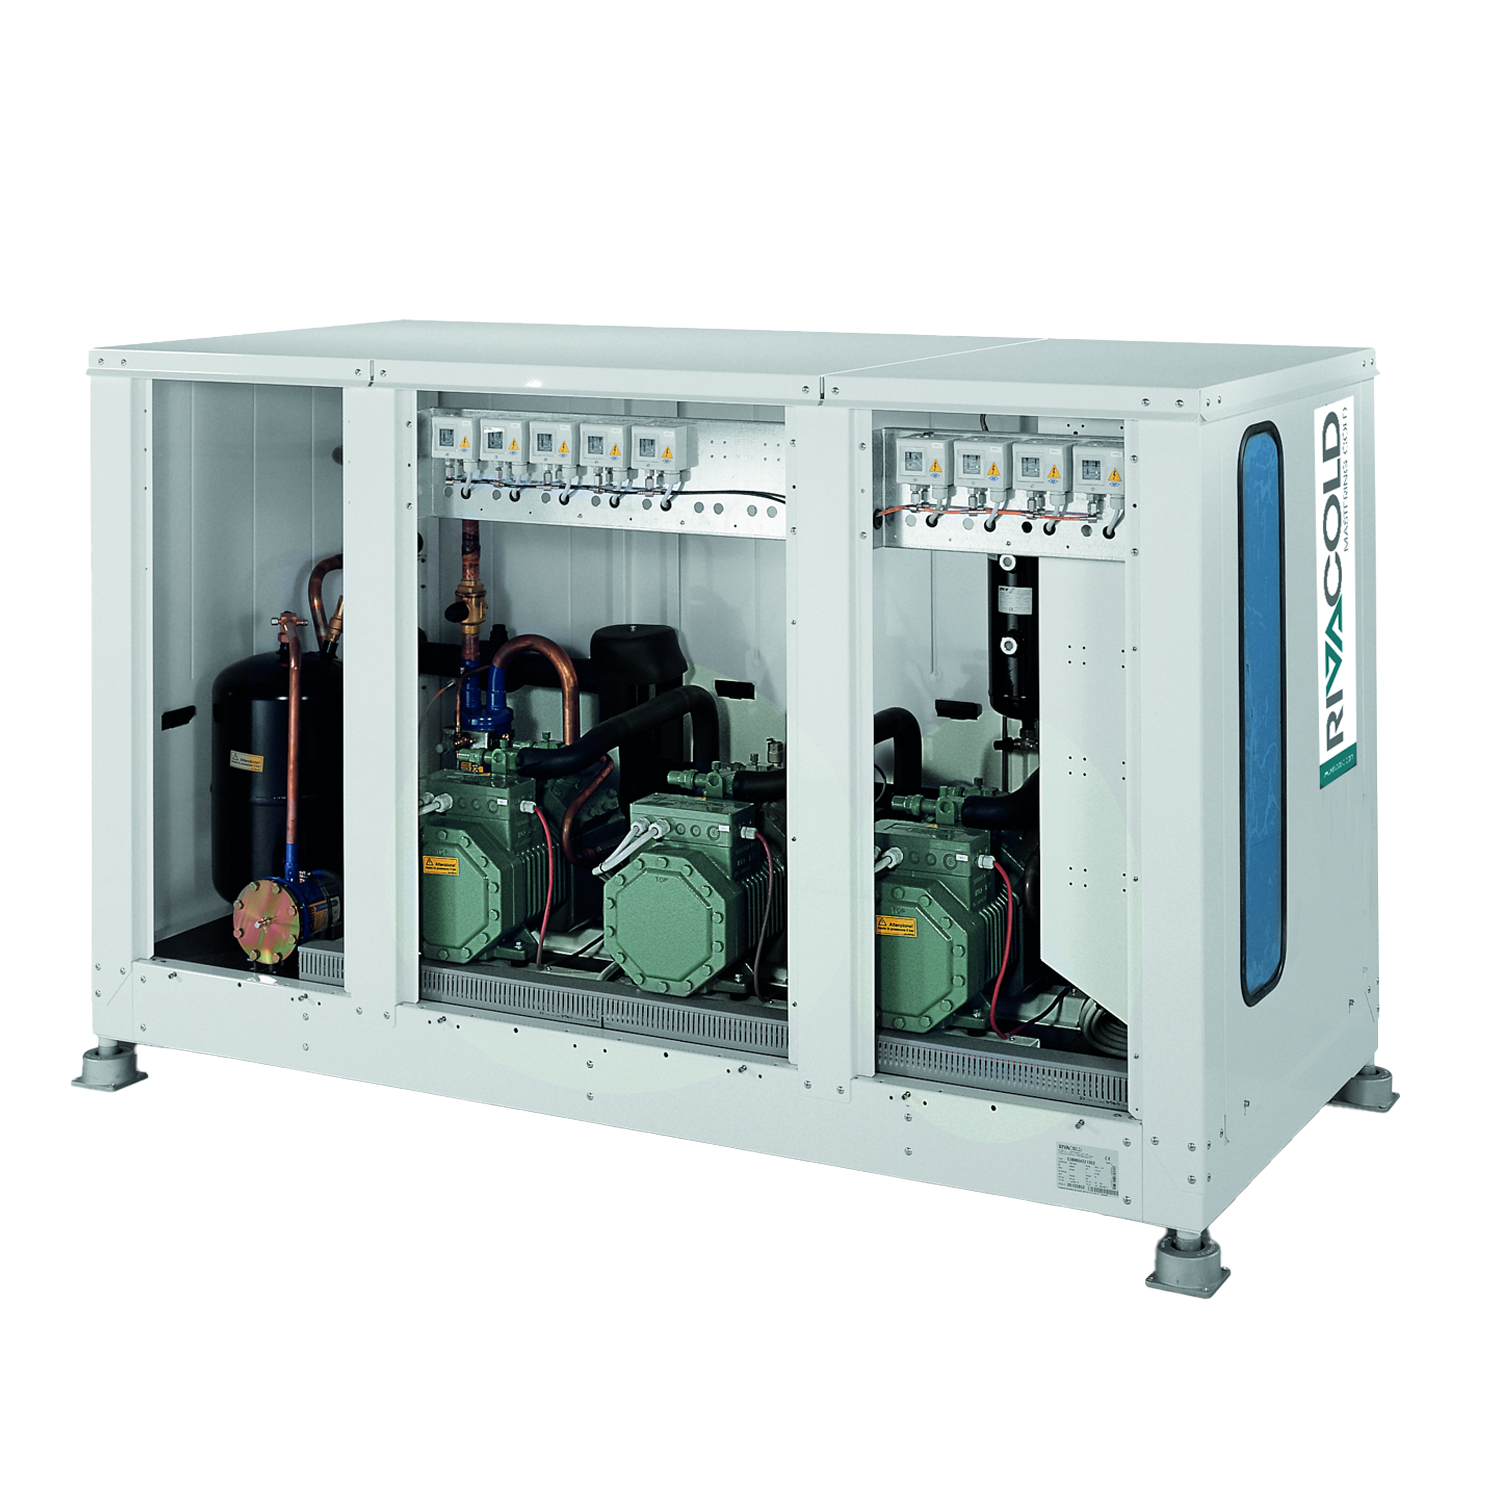 CX-B: Multi Compressor Packs NK/TK with 3 x Bitzer reciprocating compressors, without condenser – R134a/R513A/R449A